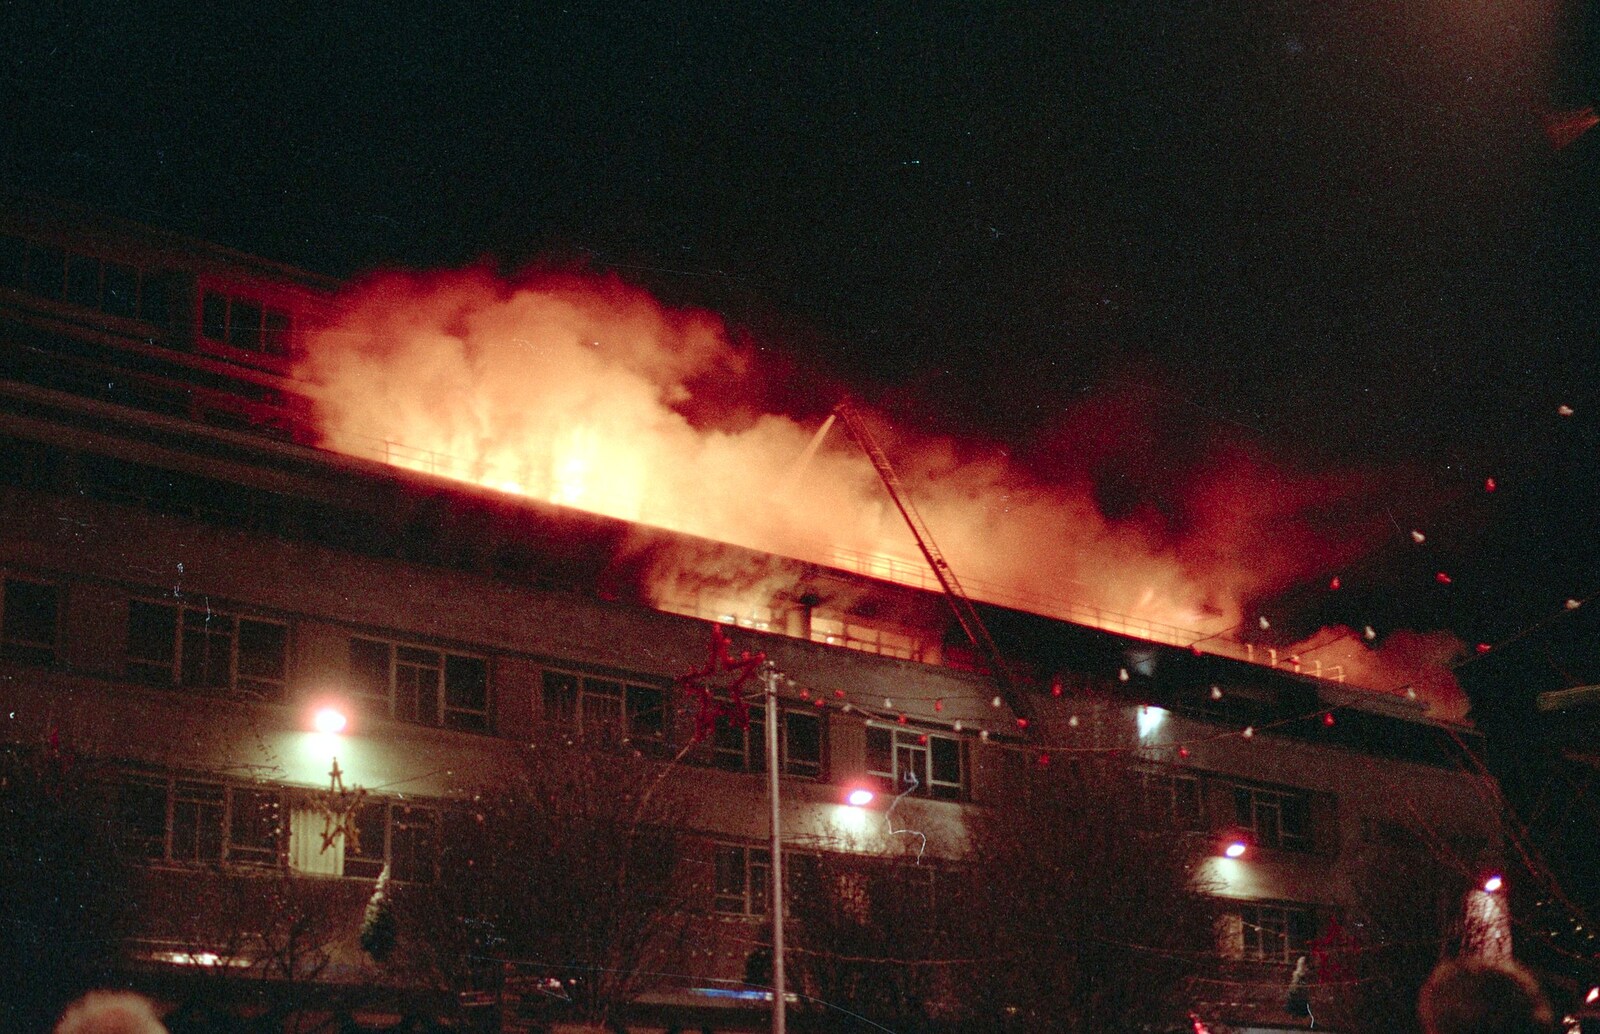 Ladder-mounted hoses douse the flames from Uni: The Fire-Bombing of Dingles, Plymouth, Devon - 19th December 1988